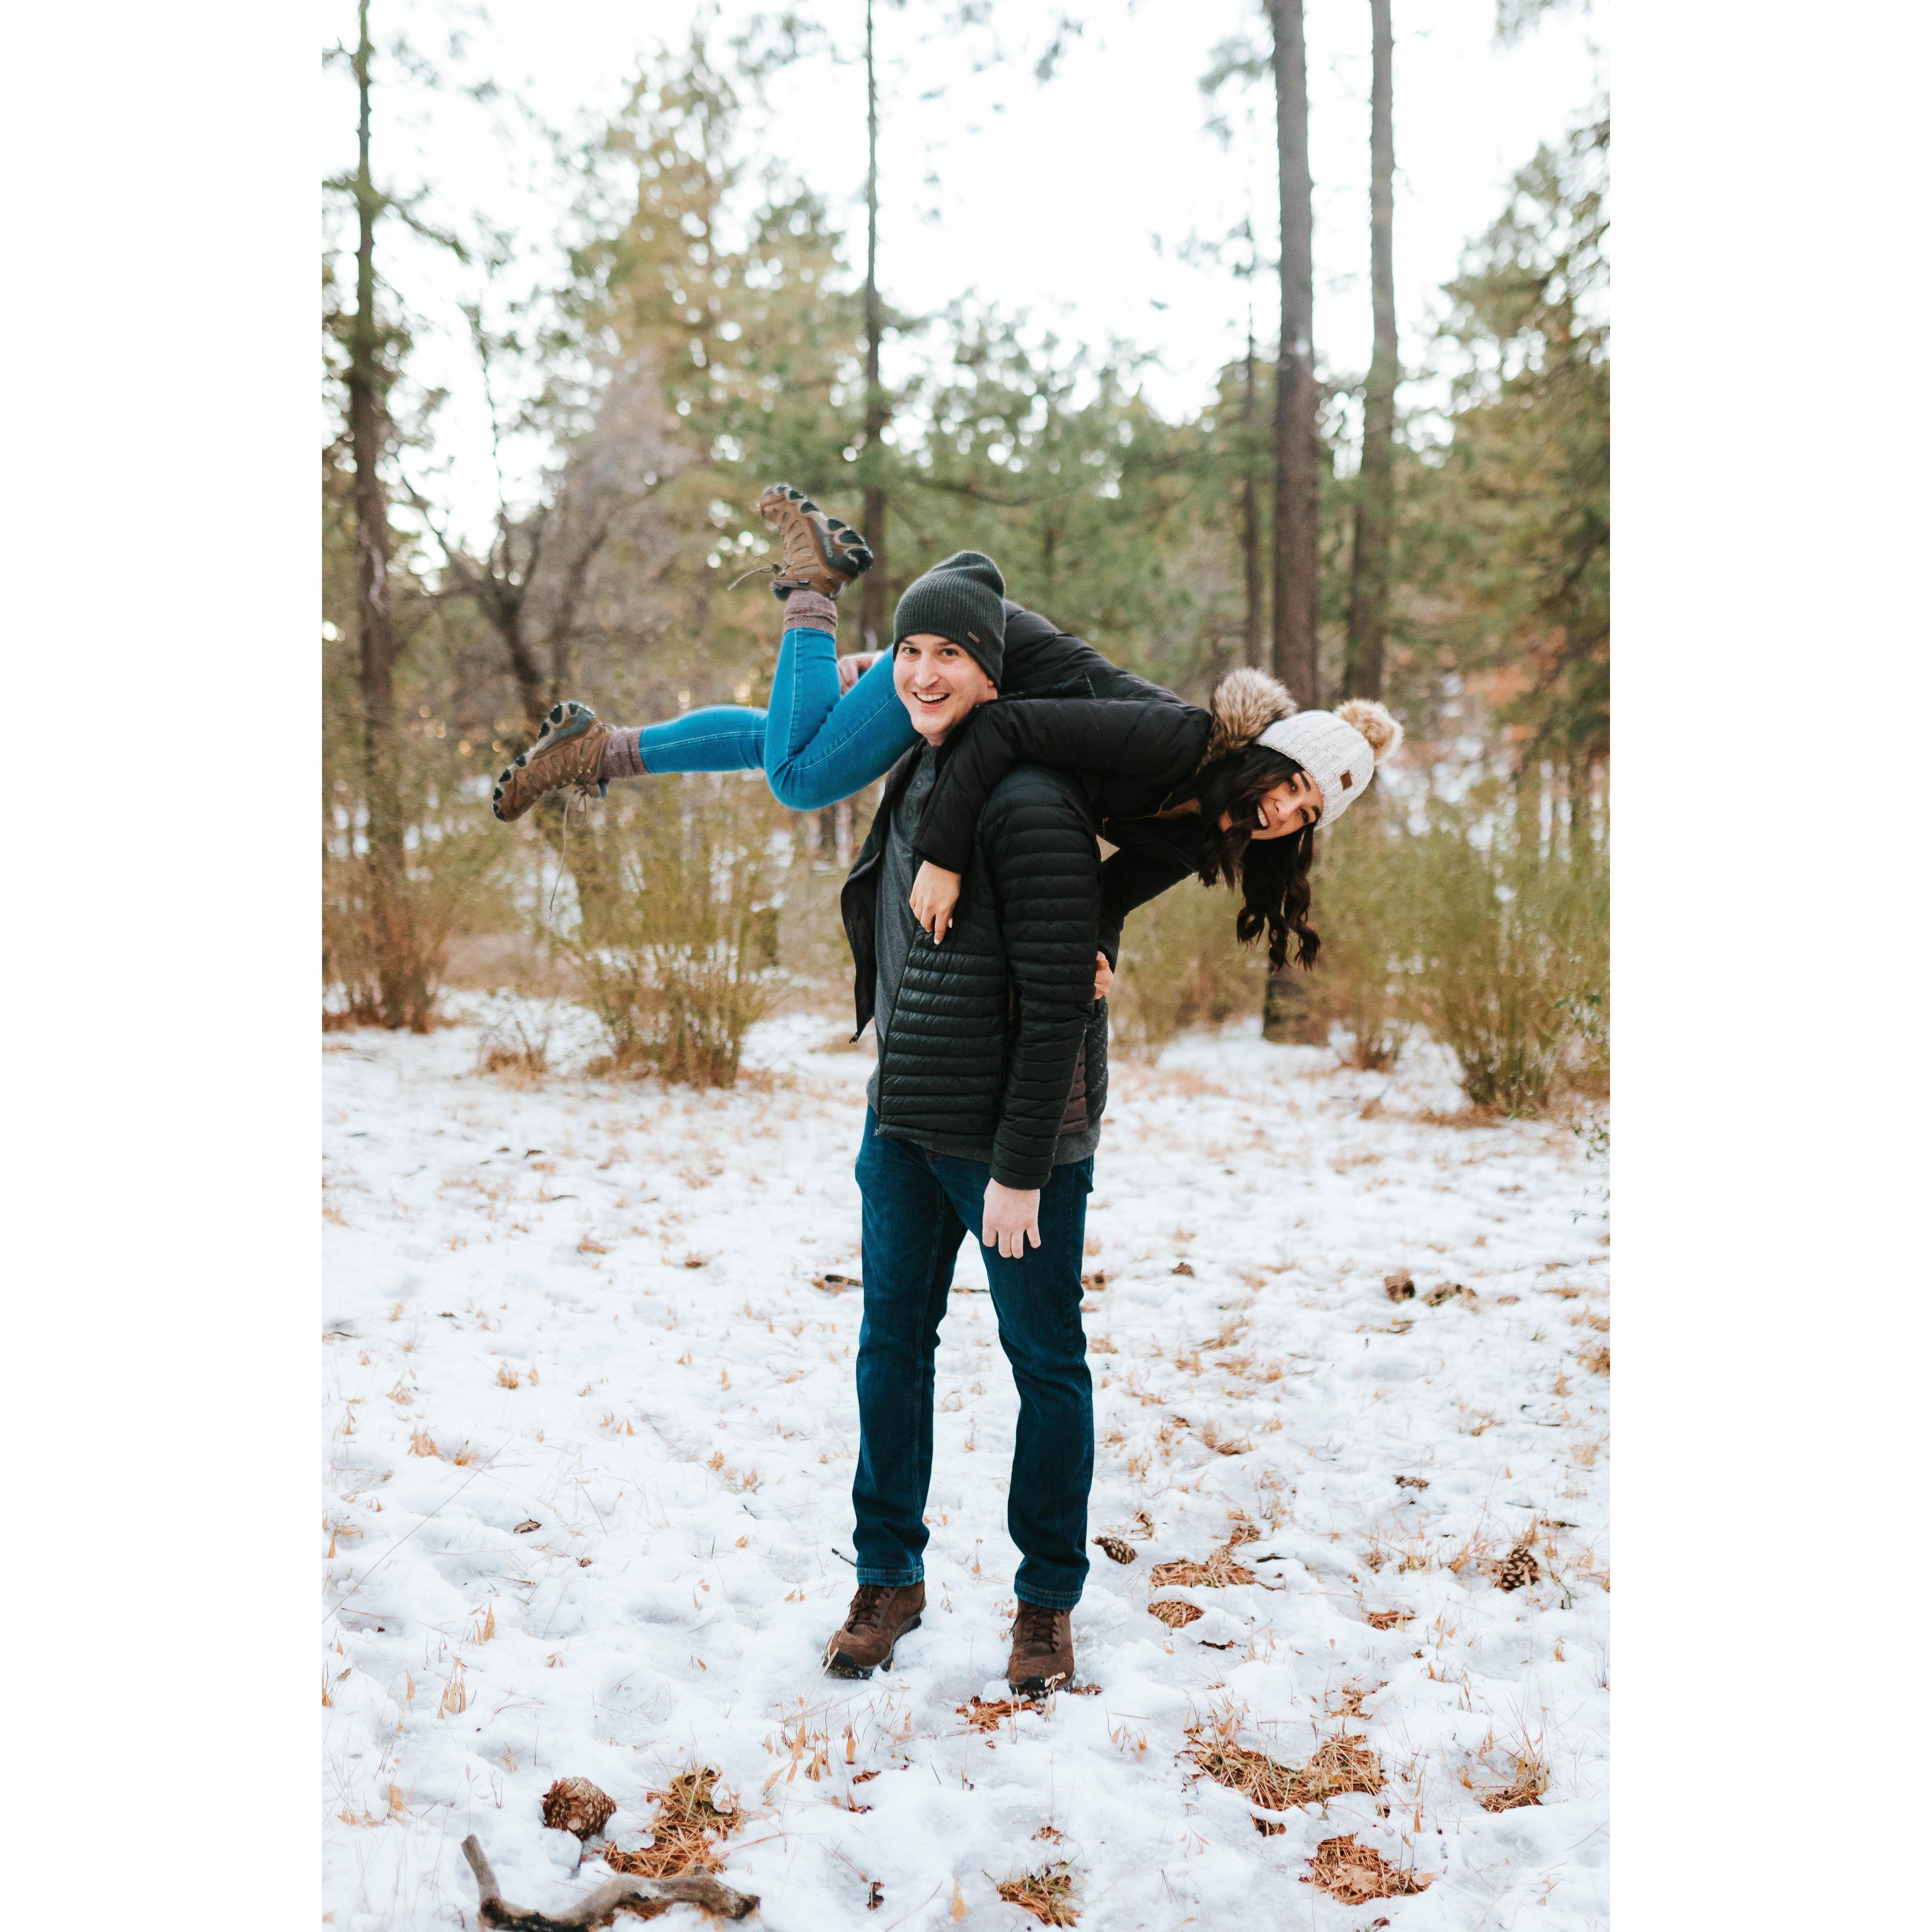 Where: Mt. Laguna, California. 
When: January 3, 2022 
Why: Our Engagement Photo Shoot